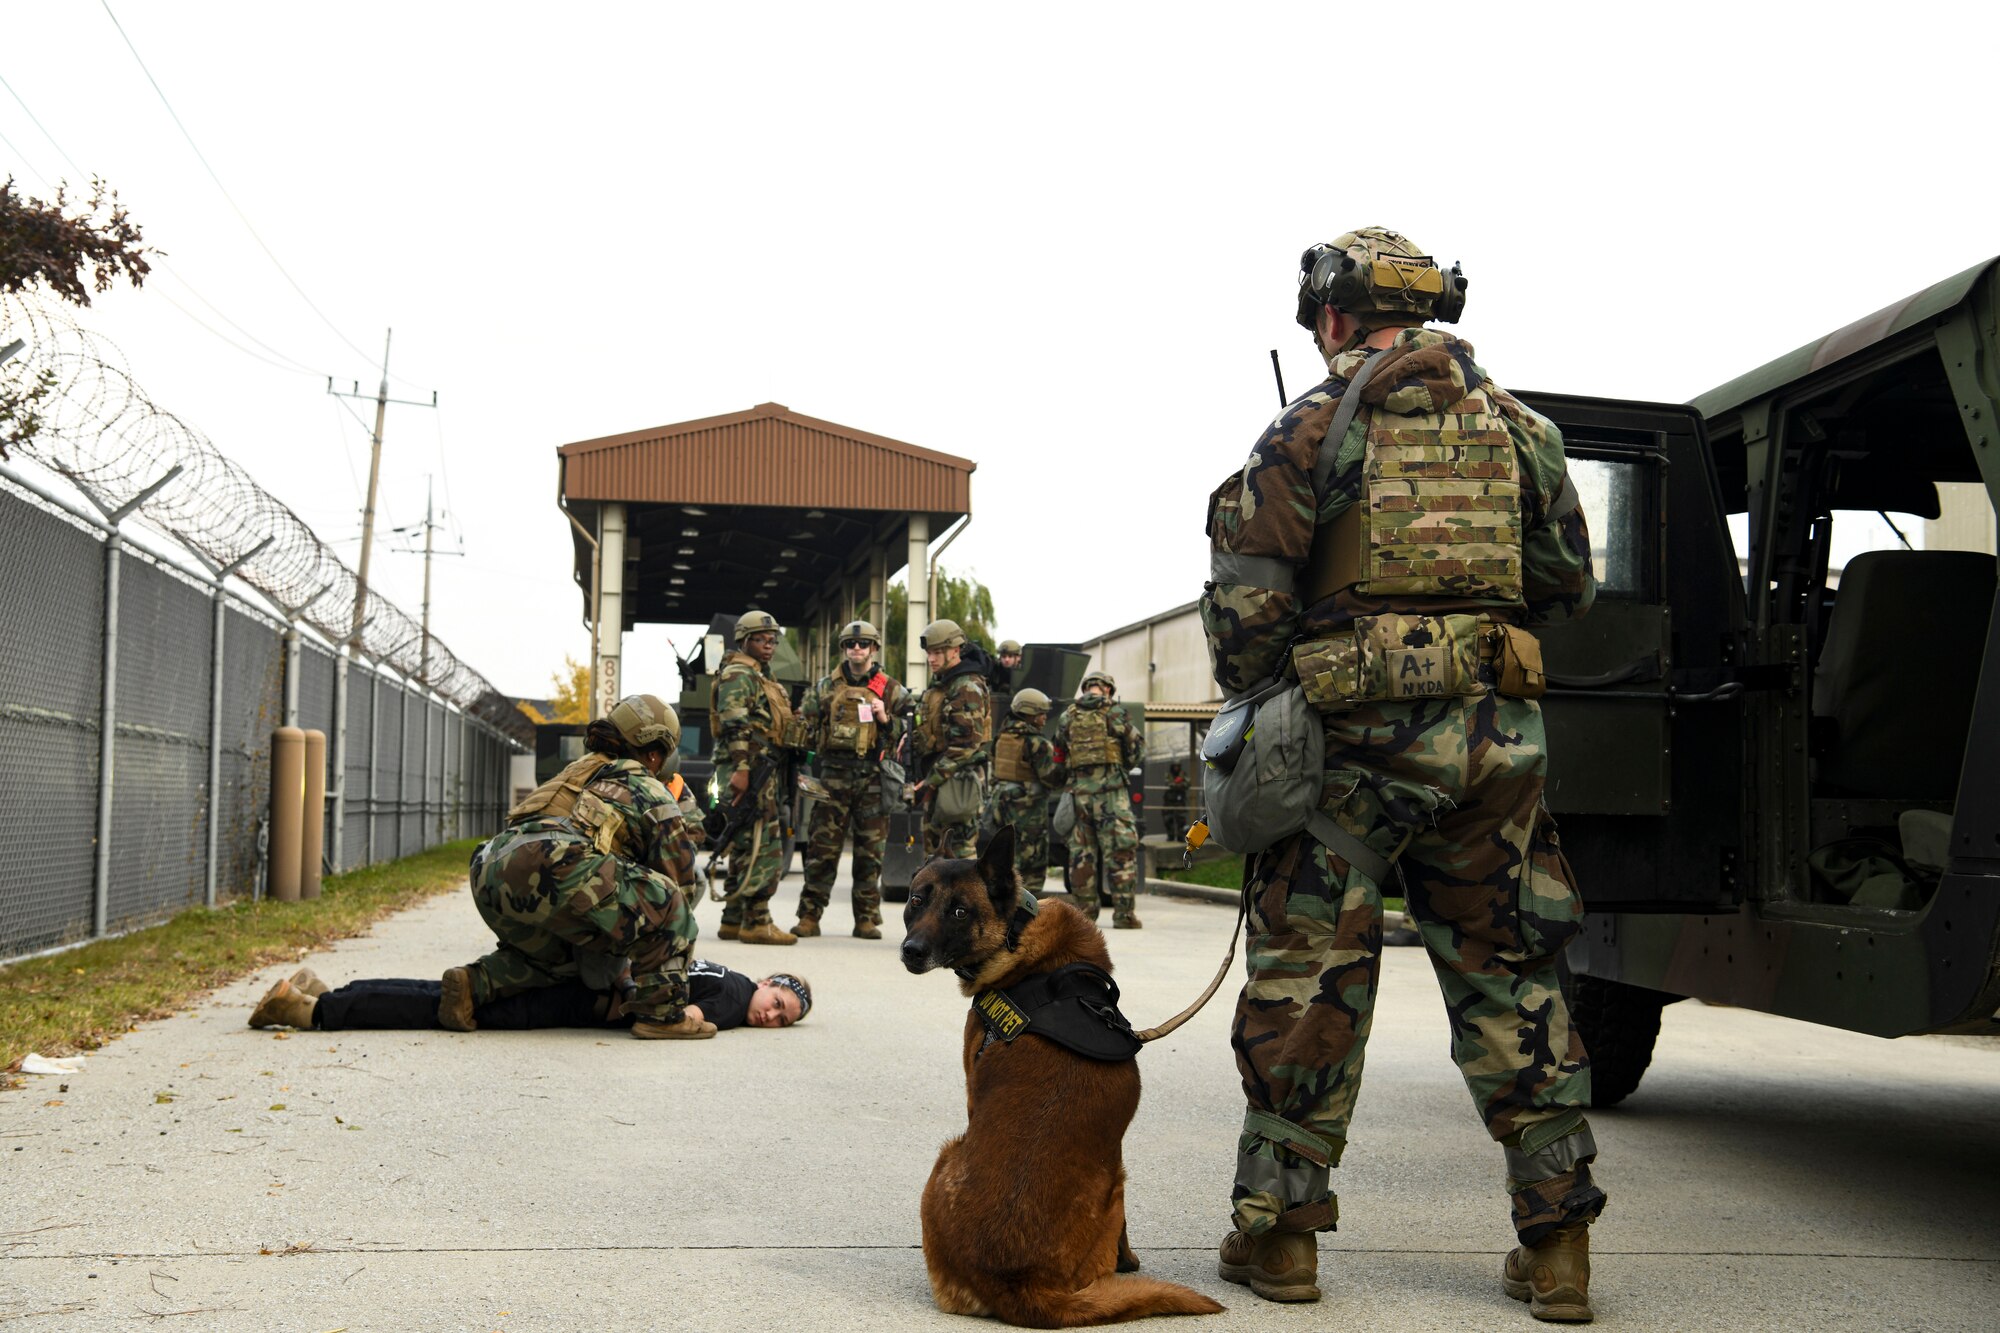 Pedro, an 8th Security Forces Squadron Military Working Dog, sits while 8th SFS defenders apprehend a simulated trespasser during a routine training event at Kunsan Air Base, Republic of Korea, Nov. 1, 2021. The Kunsan defenders are constantly training on their efficiency on base defense, leading to successfully locating and apprehending the simulated trespassers. (U.S. Air Force photo by Staff Sgt. Jesenia Landaverde)